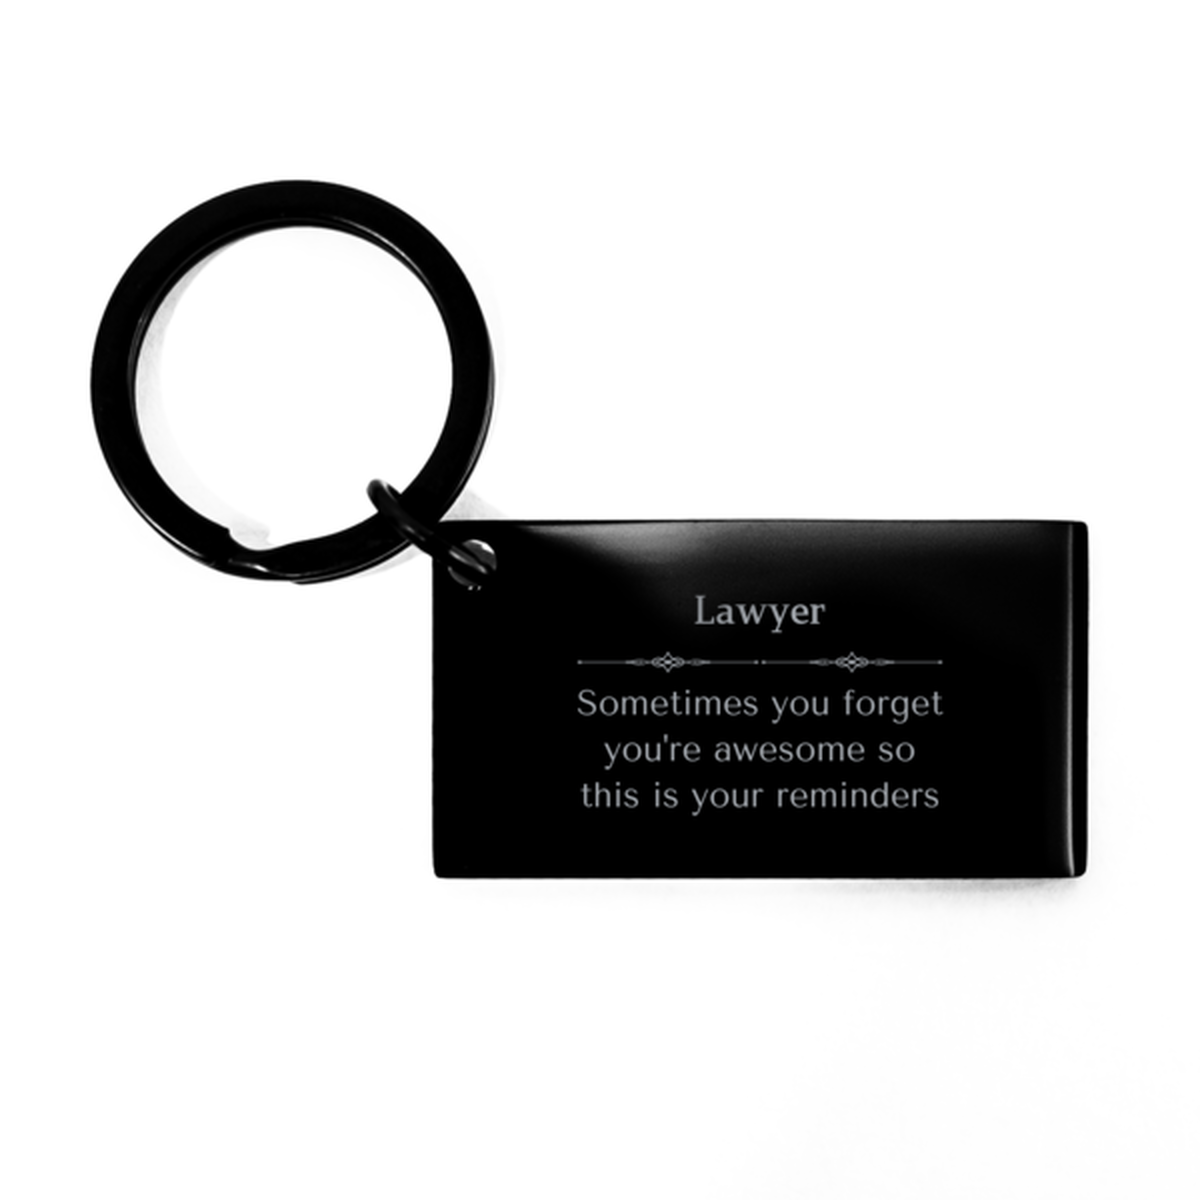 Sentimental Lawyer Keychain, Network Administrator Sometimes you forget you're awesome so this is your reminders, Graduation Christmas Birthday Gifts for Lawyer, Men, Women, Coworkers